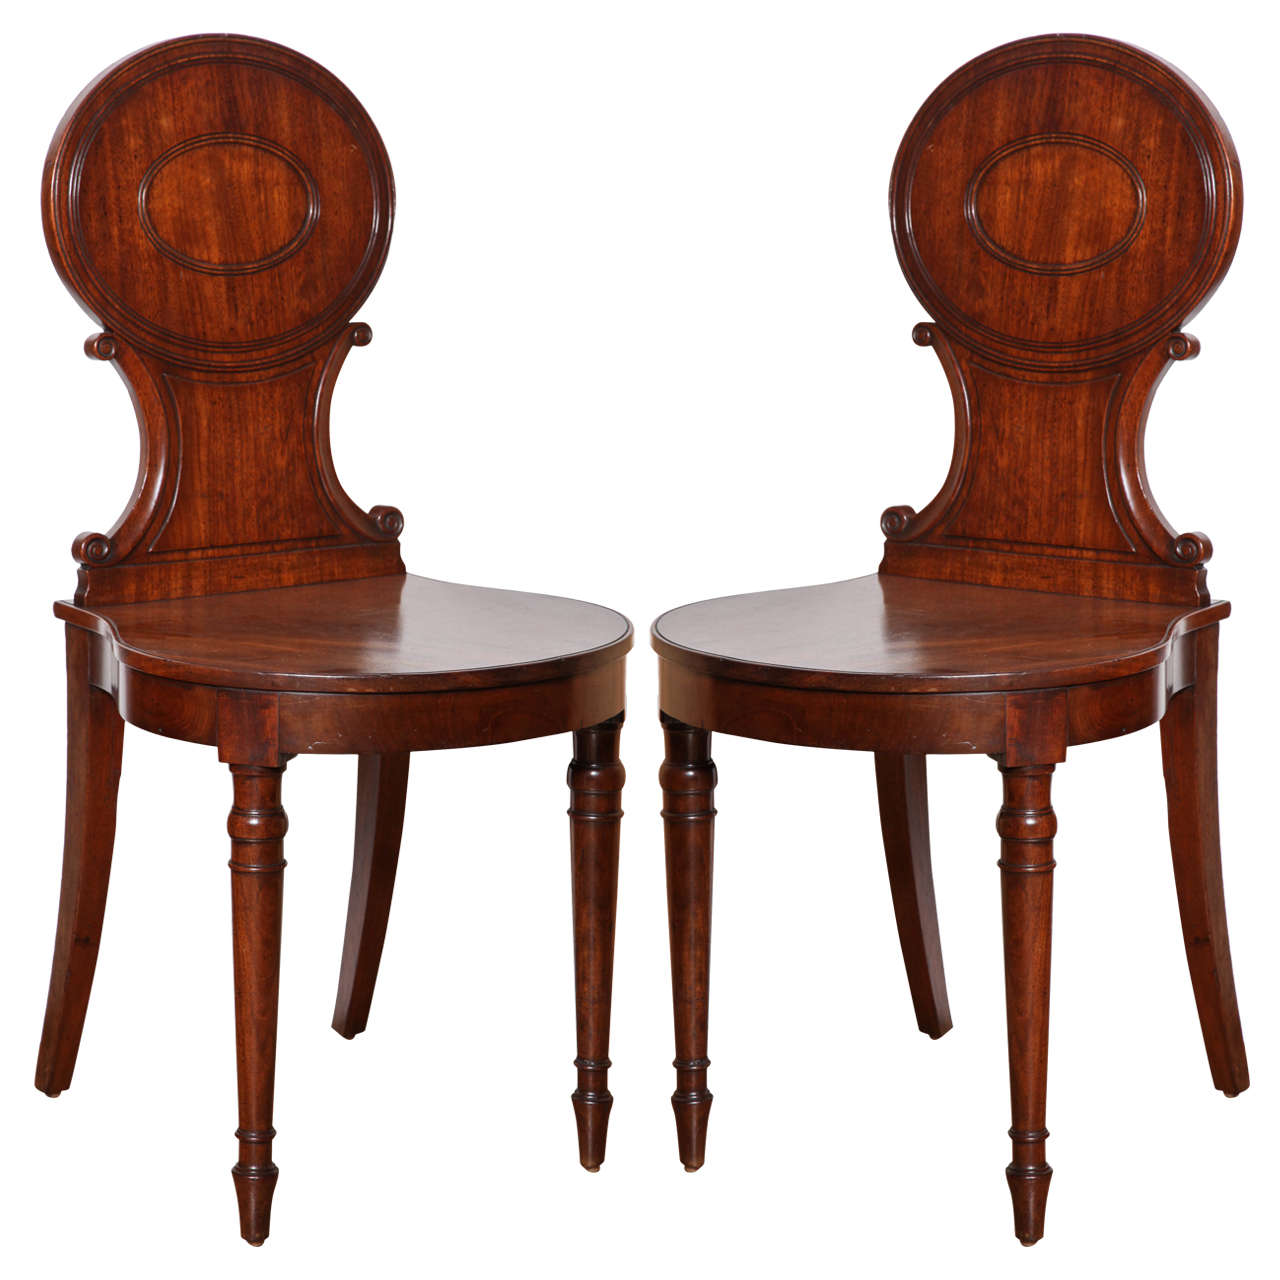 Pair of Carved Mahogany Hall Chairs, England, Early 19th Century For Sale